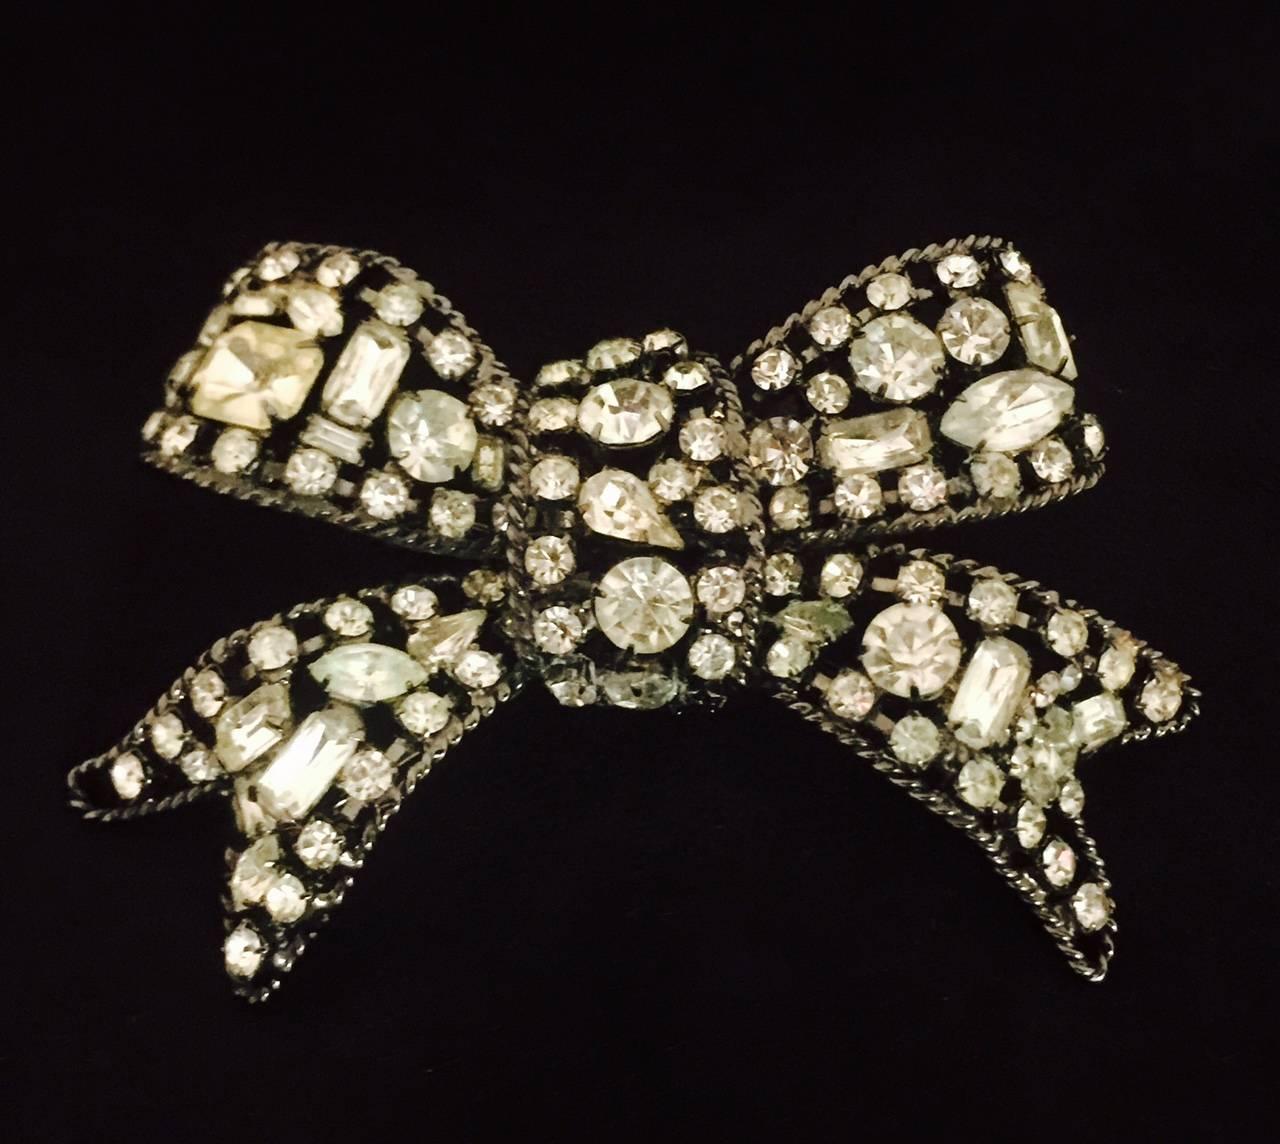 Lawrence VRBA, a former top jewelry designer for Miriam Haskell in the 1960s, creates amazing costume jewelry. This is the gift you never undo!  Fabricated in blackened metal this bow is, simply stated, a fabulous brooch! Curvy, sensual and